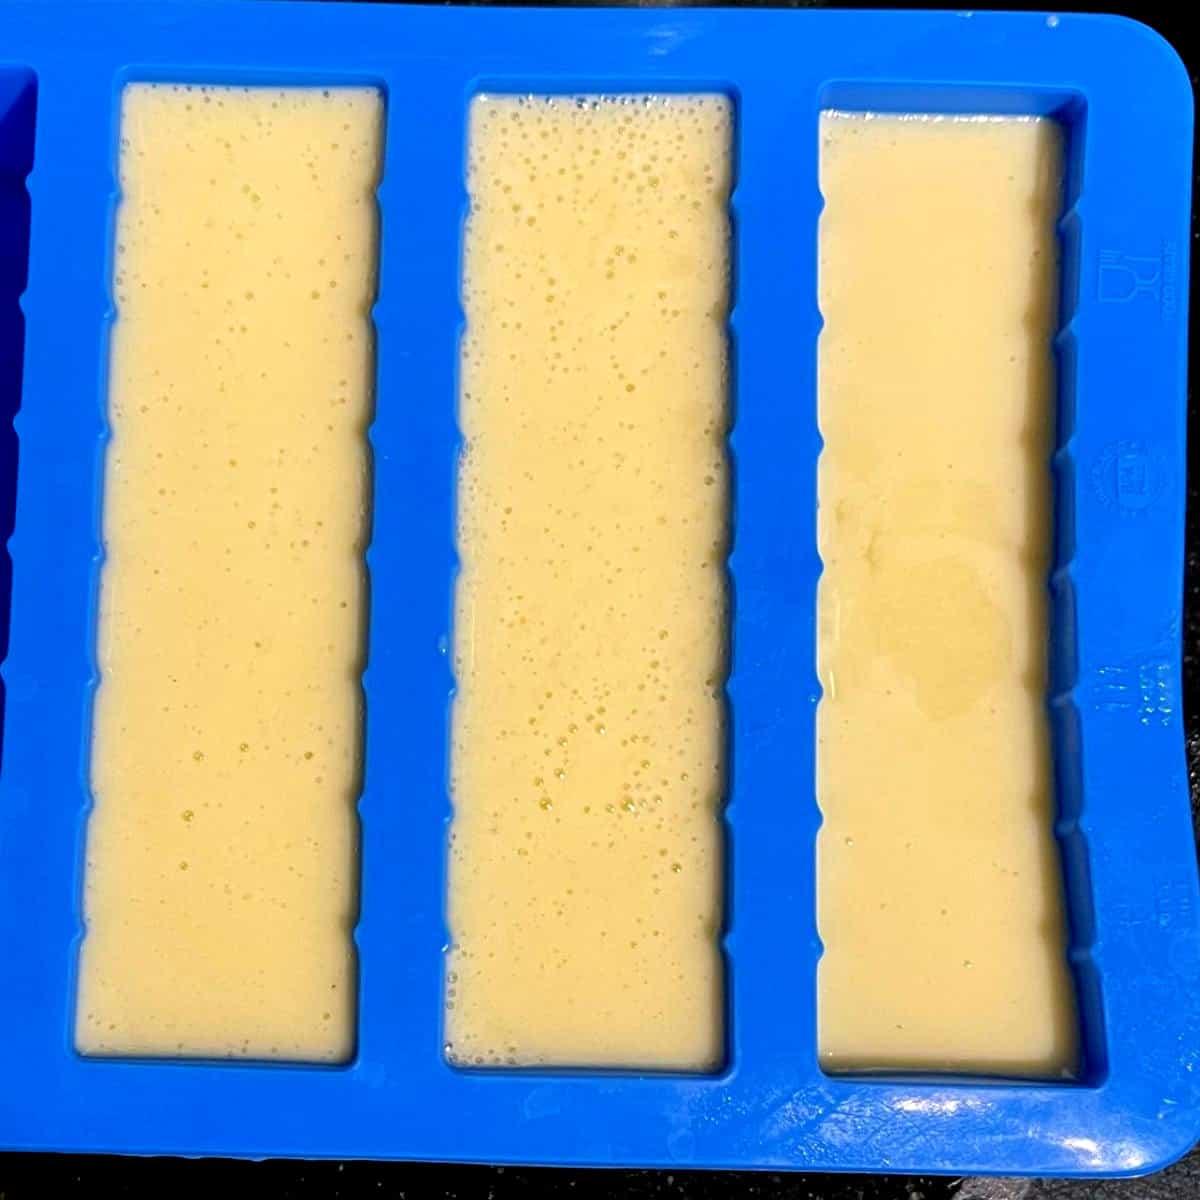 Stick the vegan butter into the mold before setting.